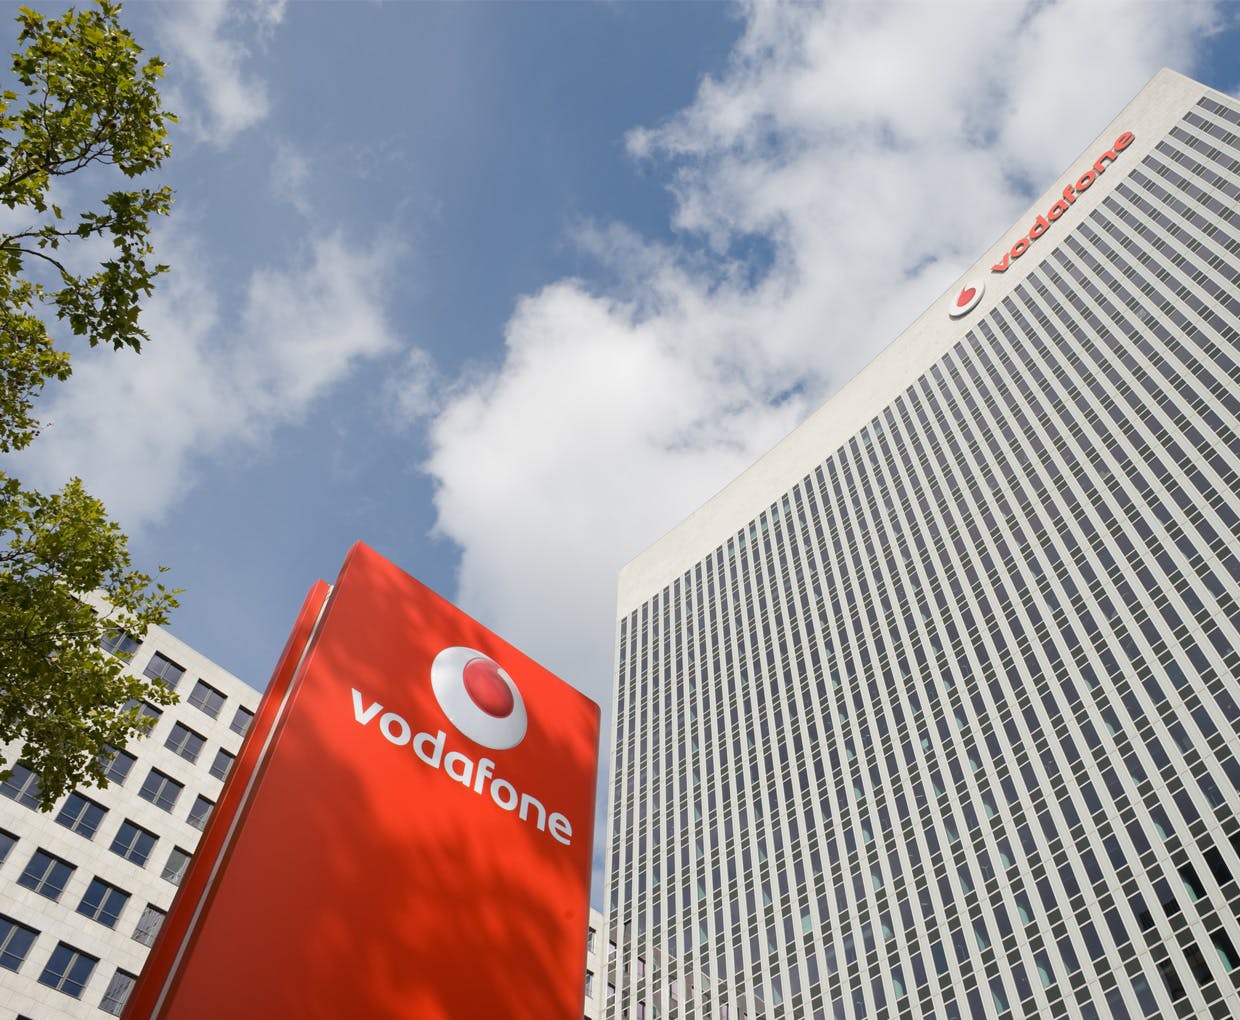 Vodafone brings together marketing and digital teams as it renews focus on innovation